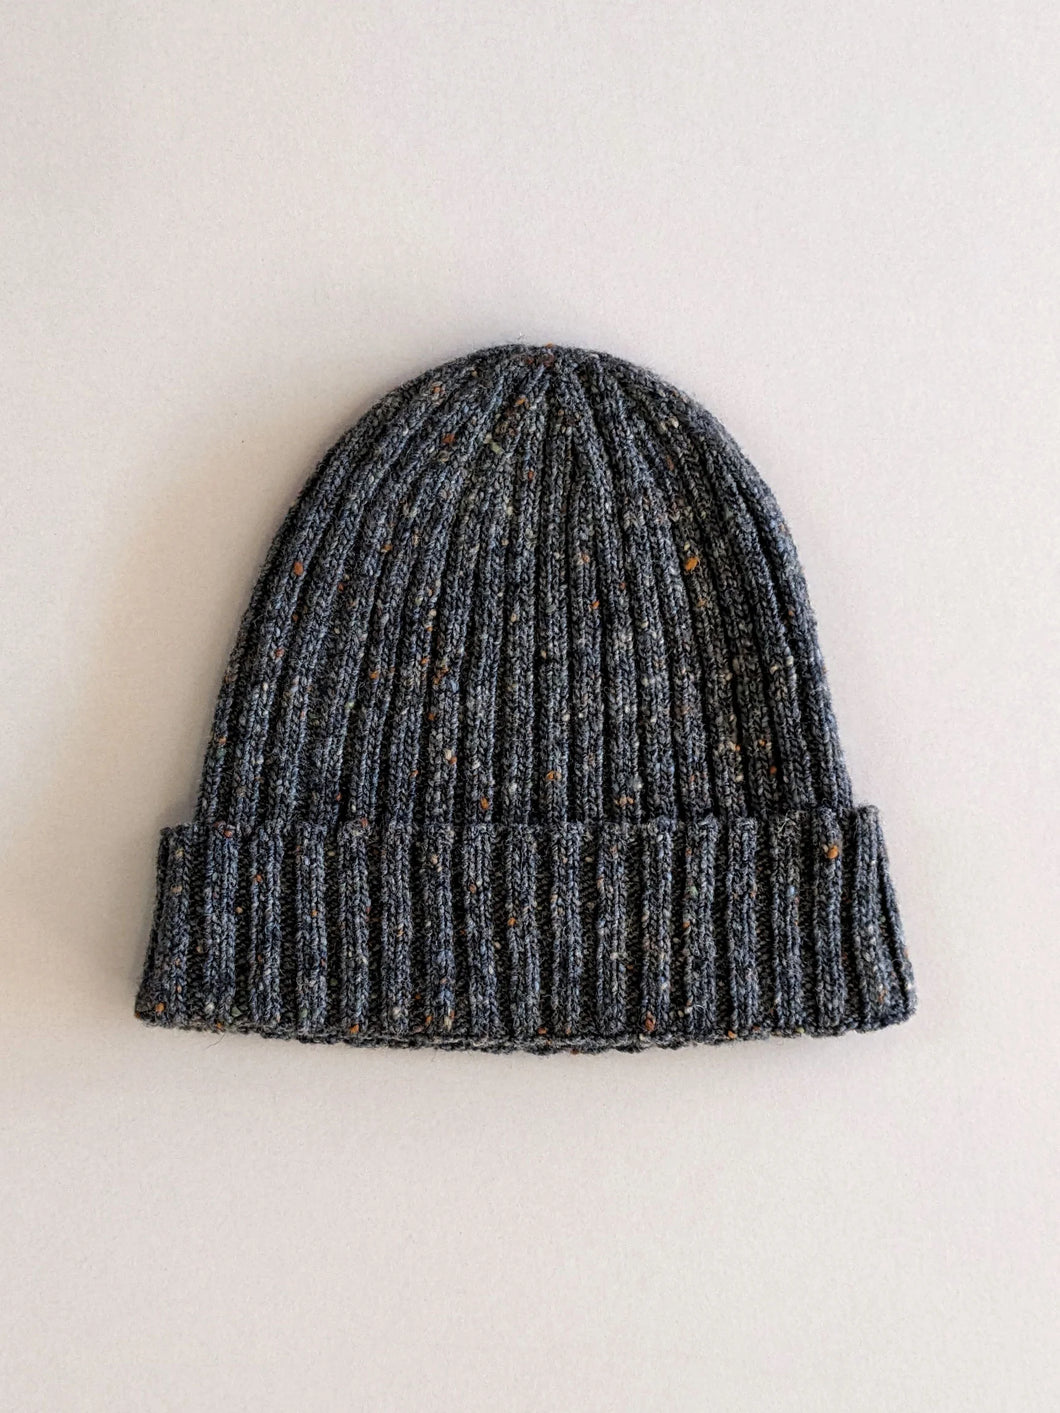 Rove Knitwear Donegal wool beanie in grey fleck. Cruelty Free + UK Made. Unisex + one size